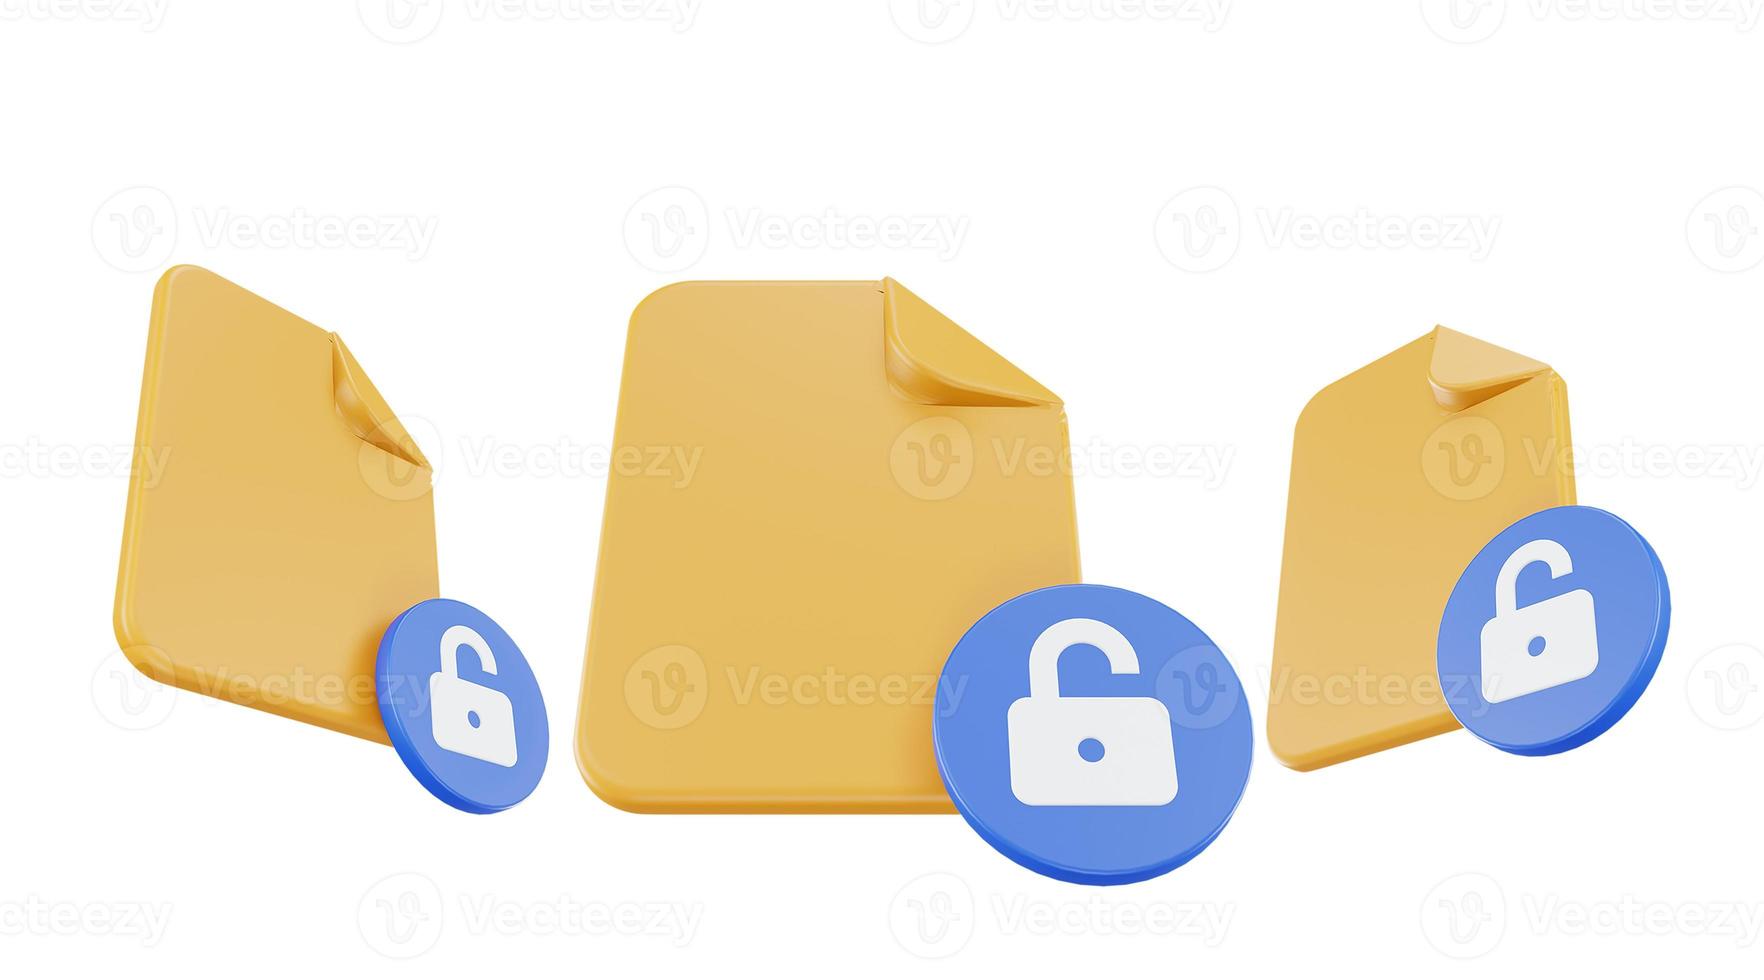 3d render file unlocked icon with orange file paper and blue unlocked photo